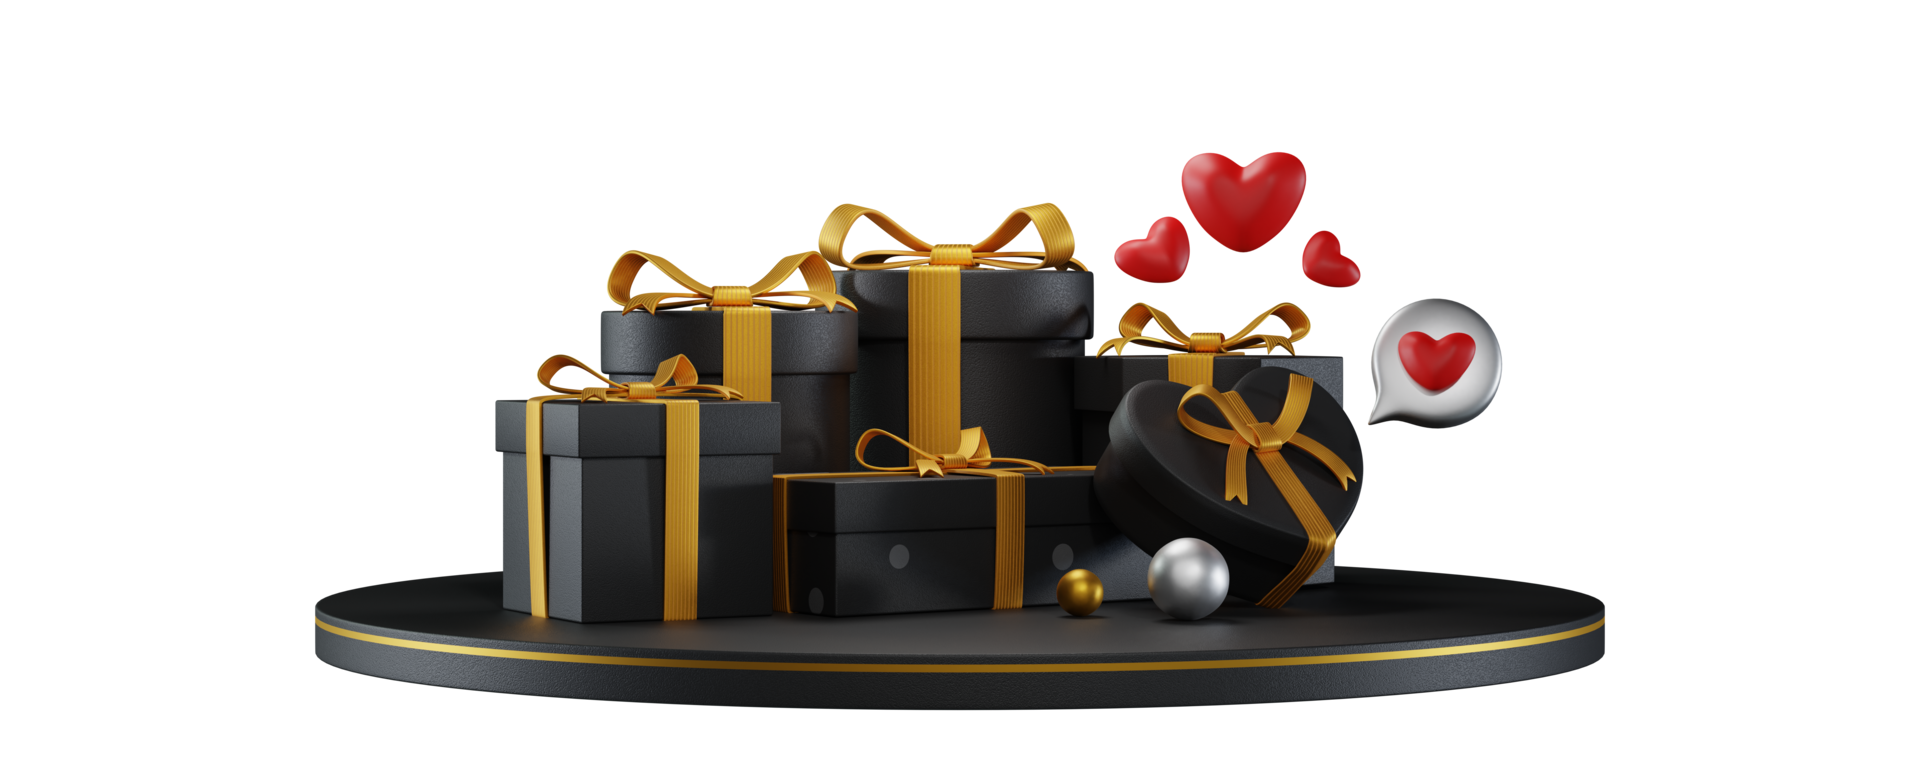 Cute Gift Box for Special Day png